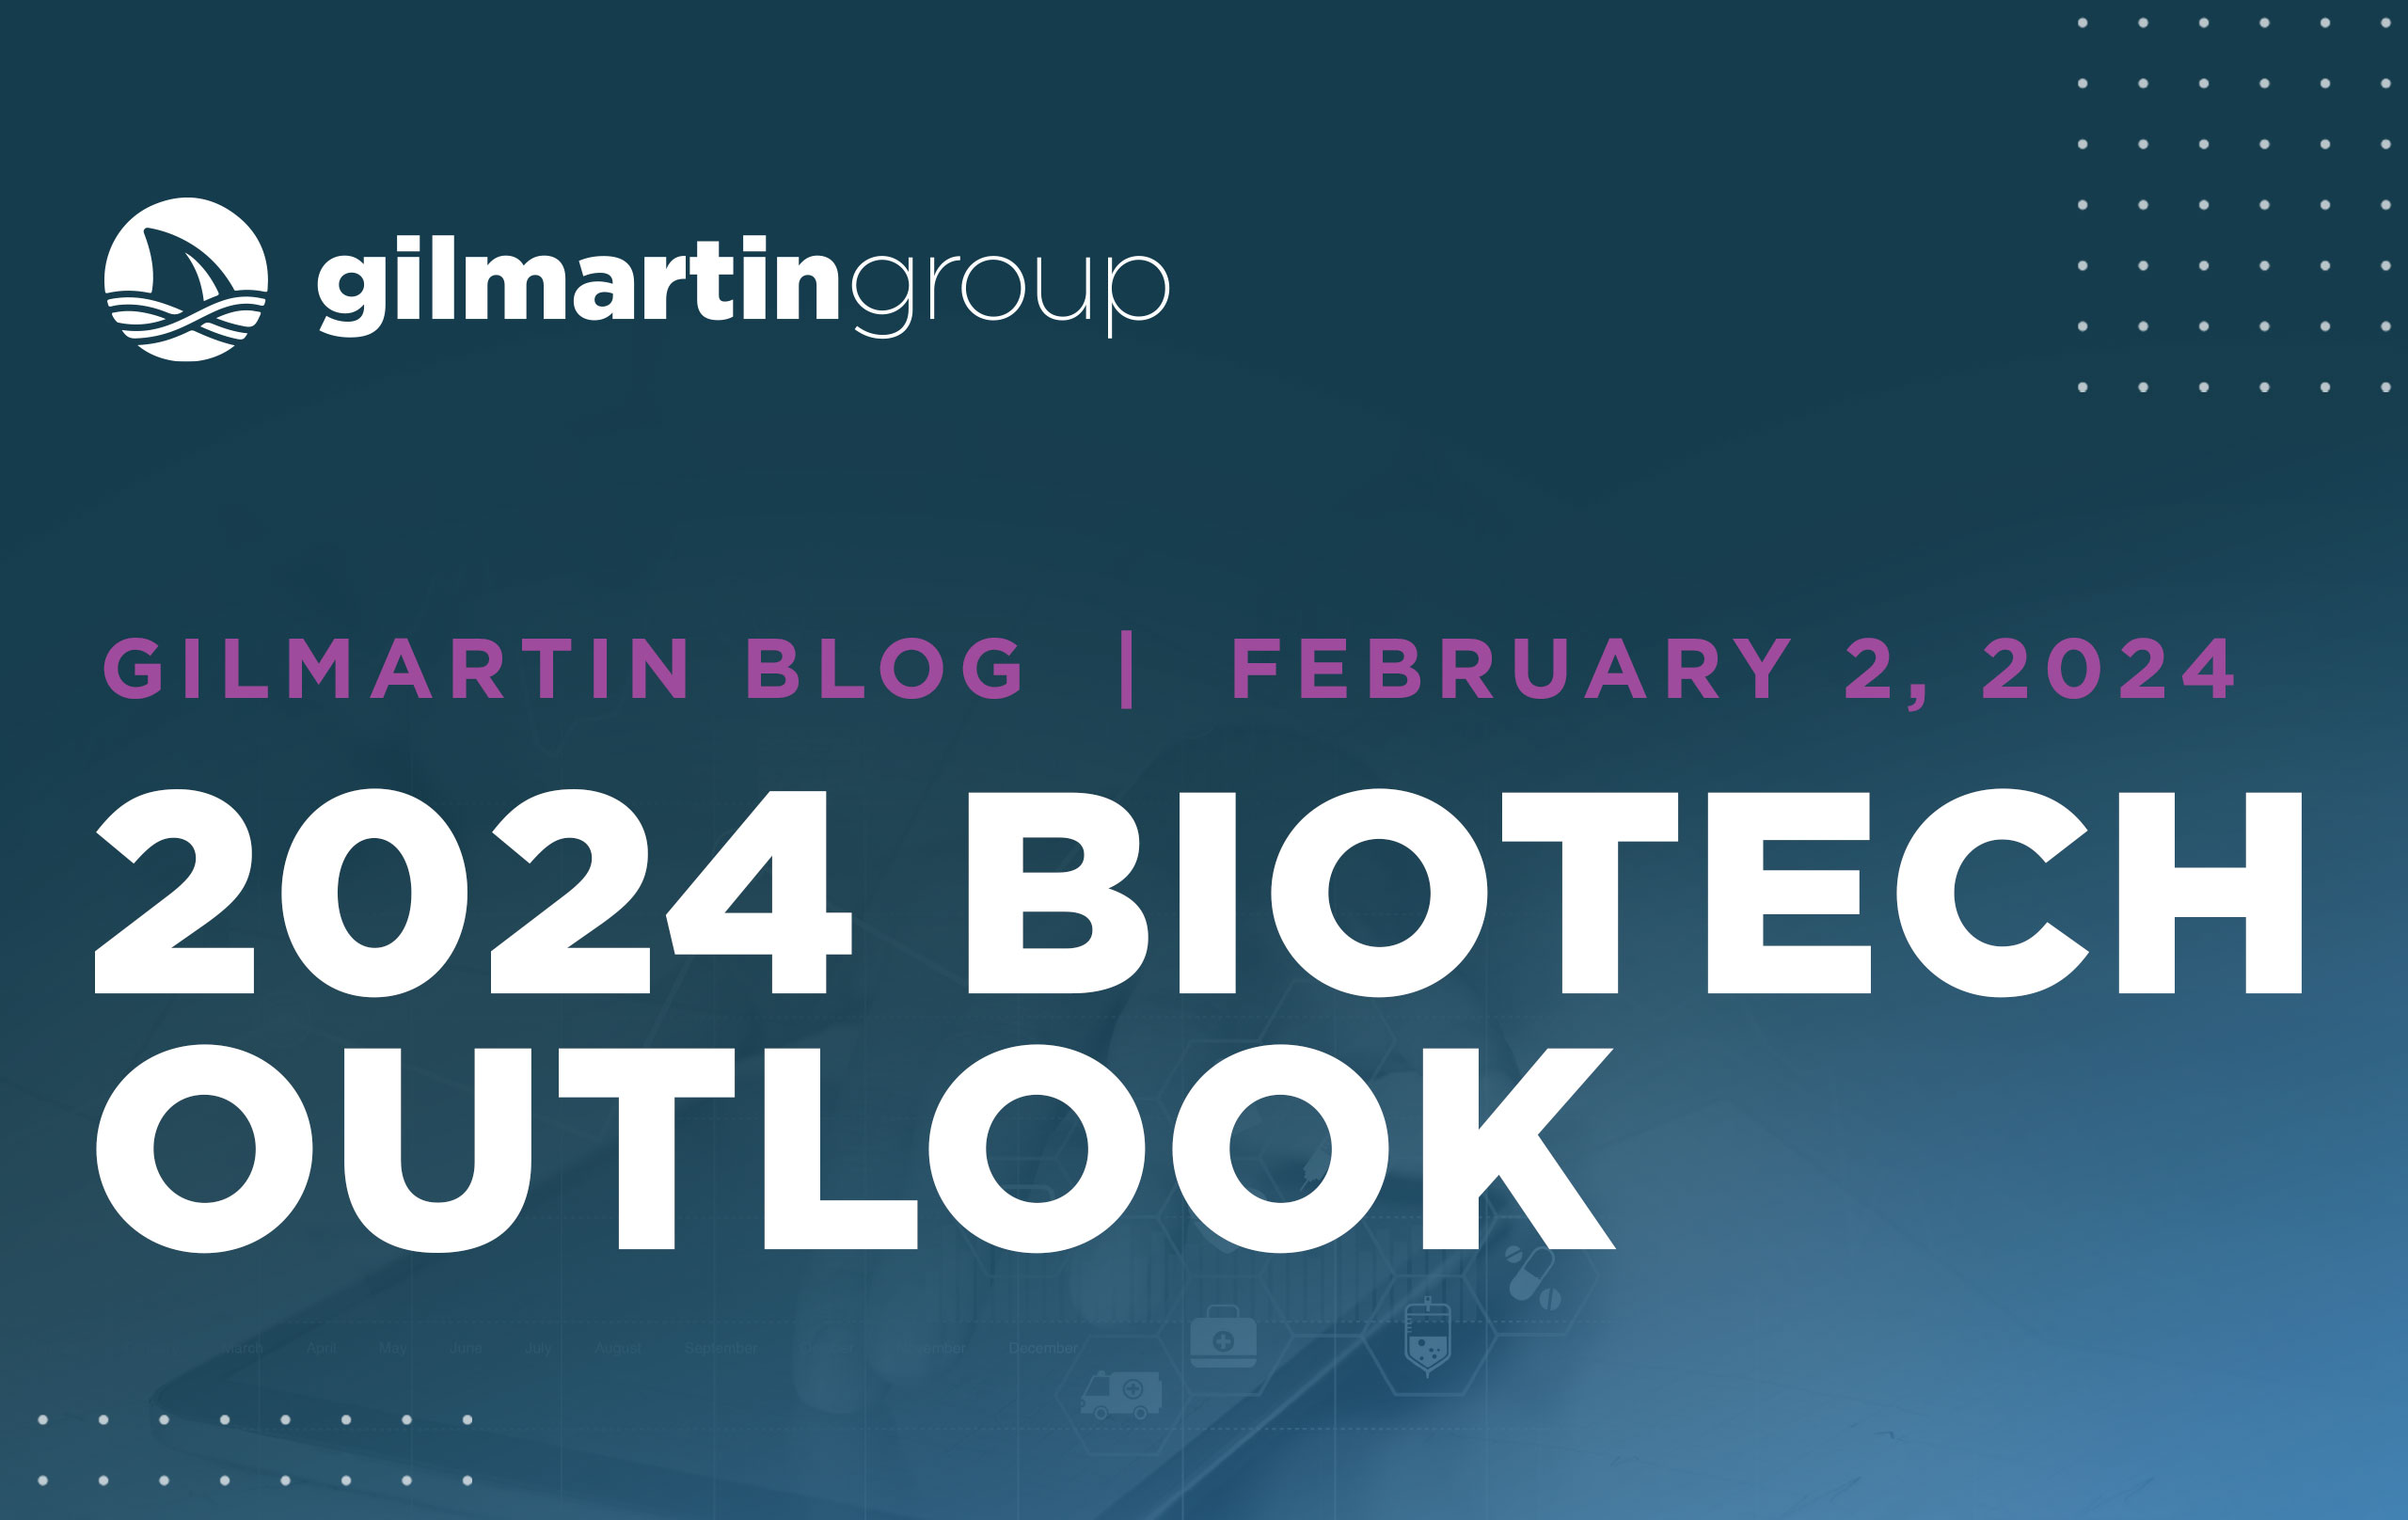 image for 2024 Biotech Outlook